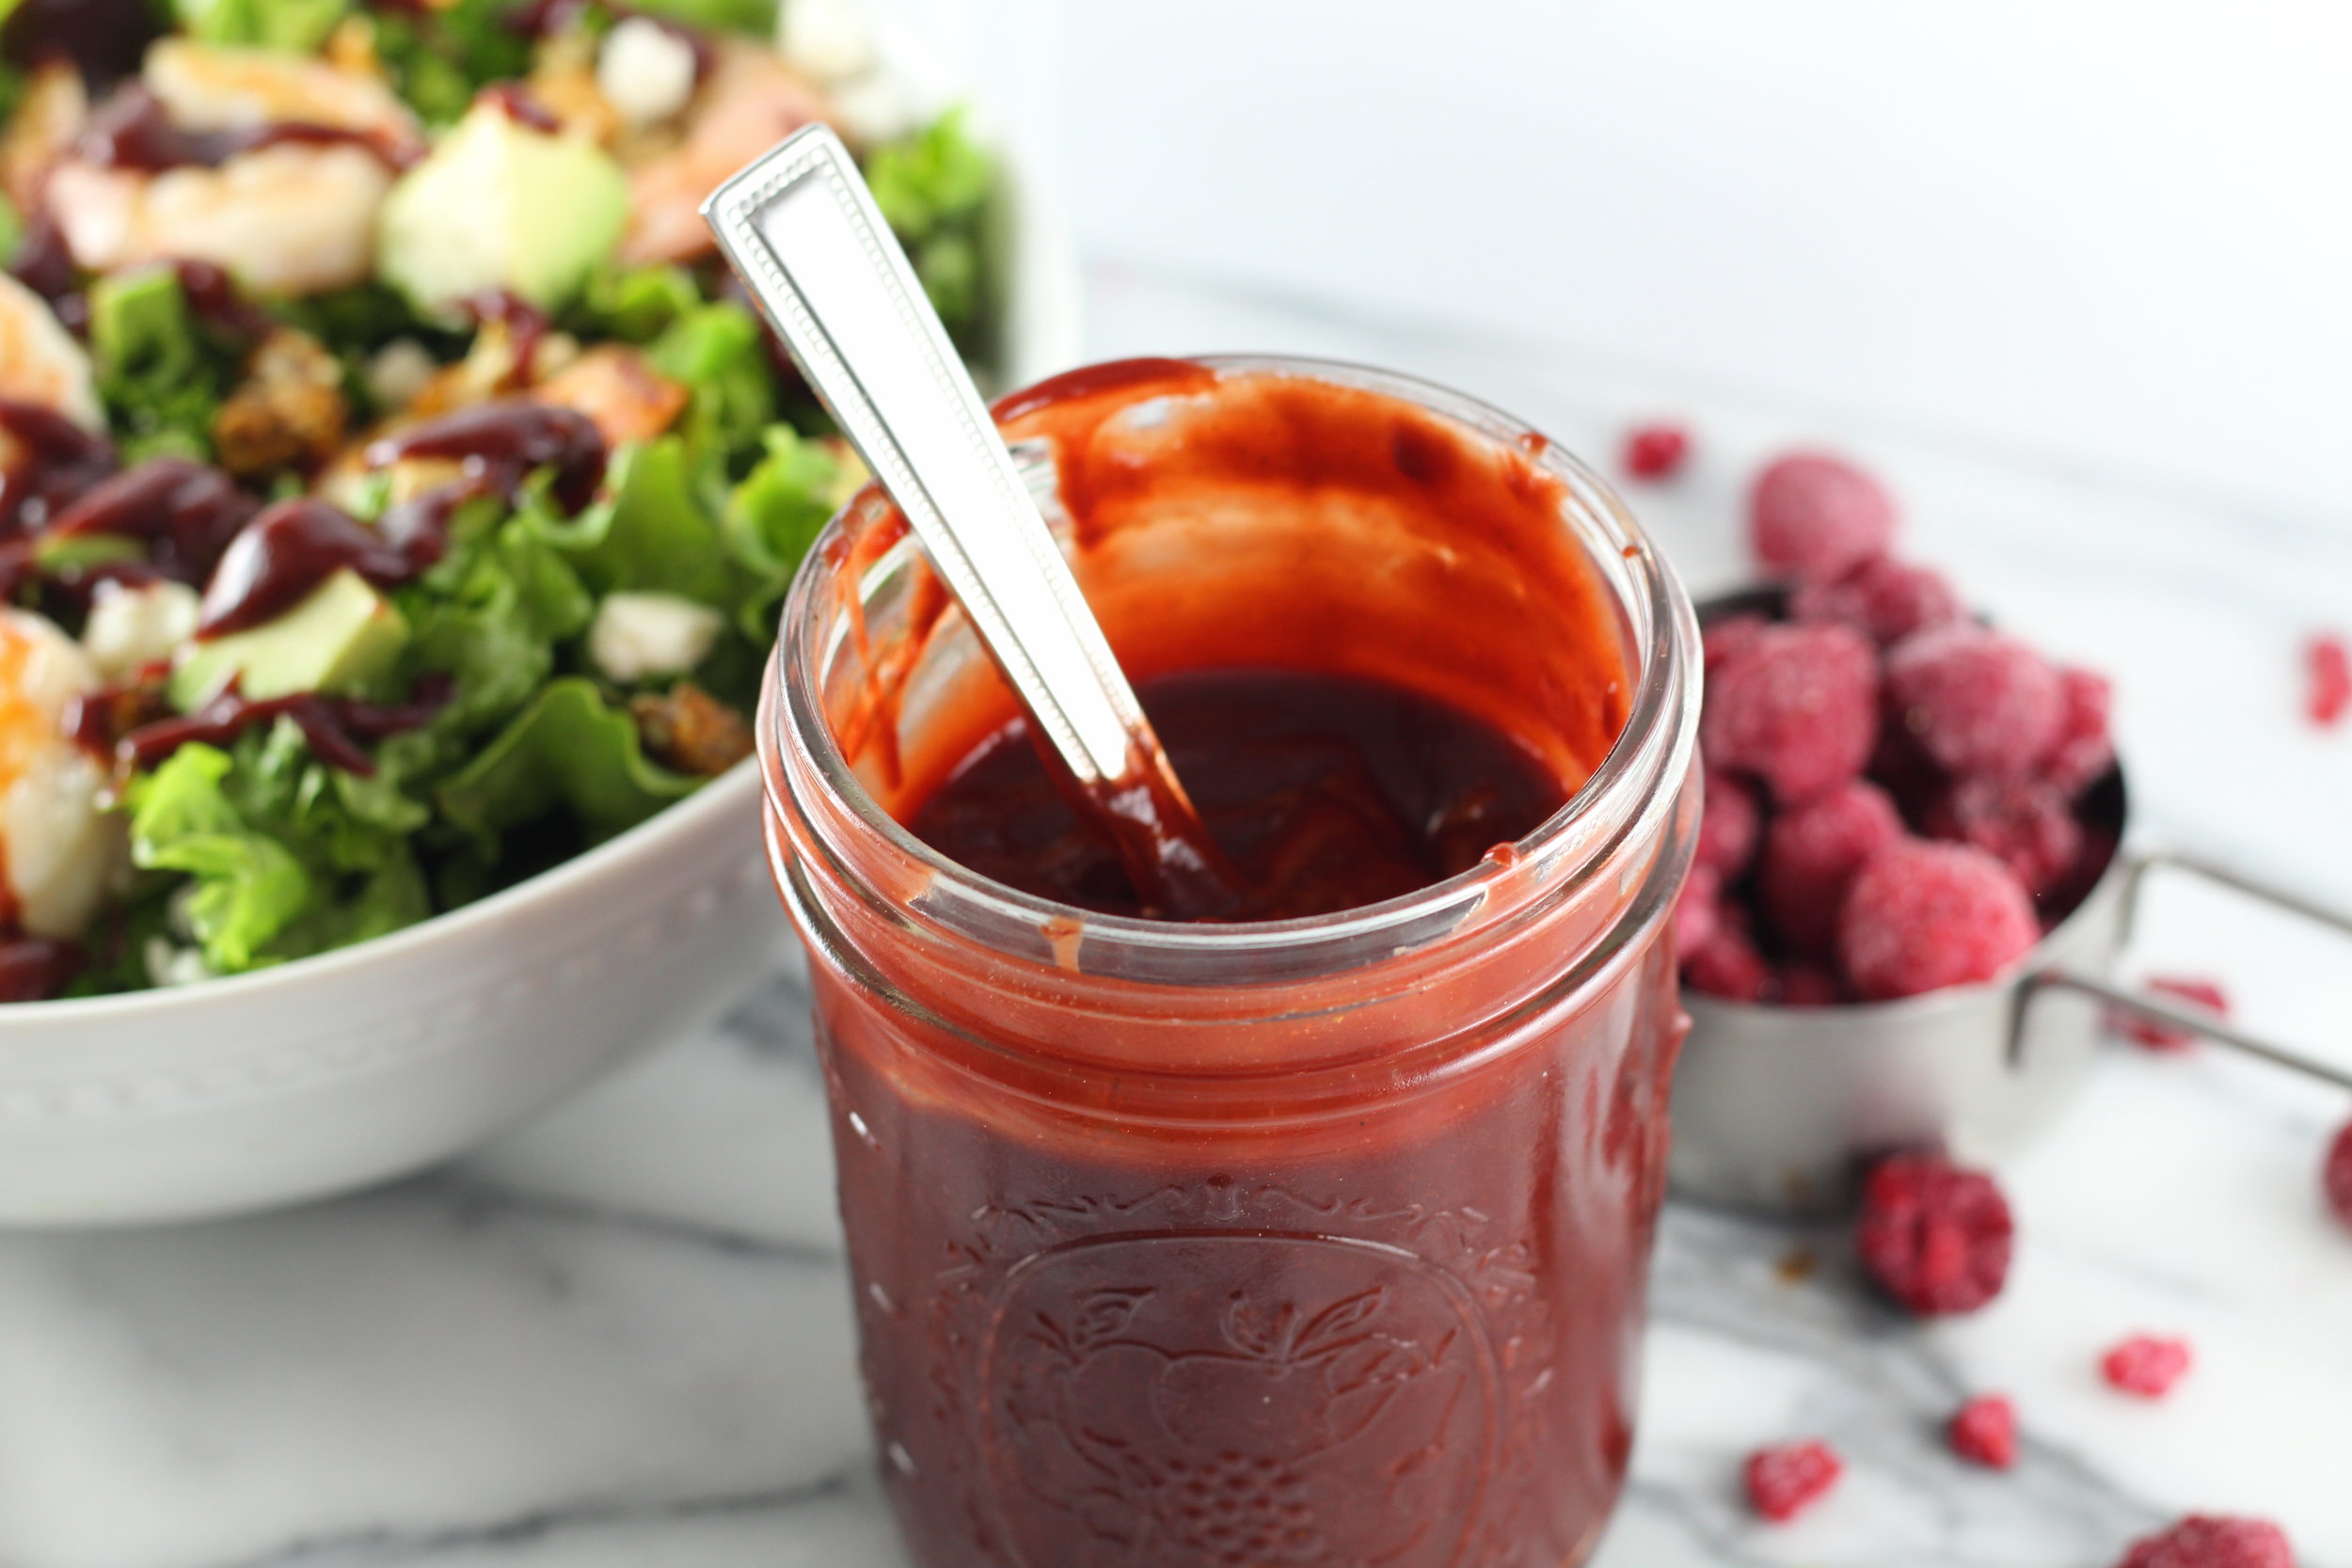  Who needs salad dressing when you can get loads of flavor with a little homemade BBQ sauce?? 